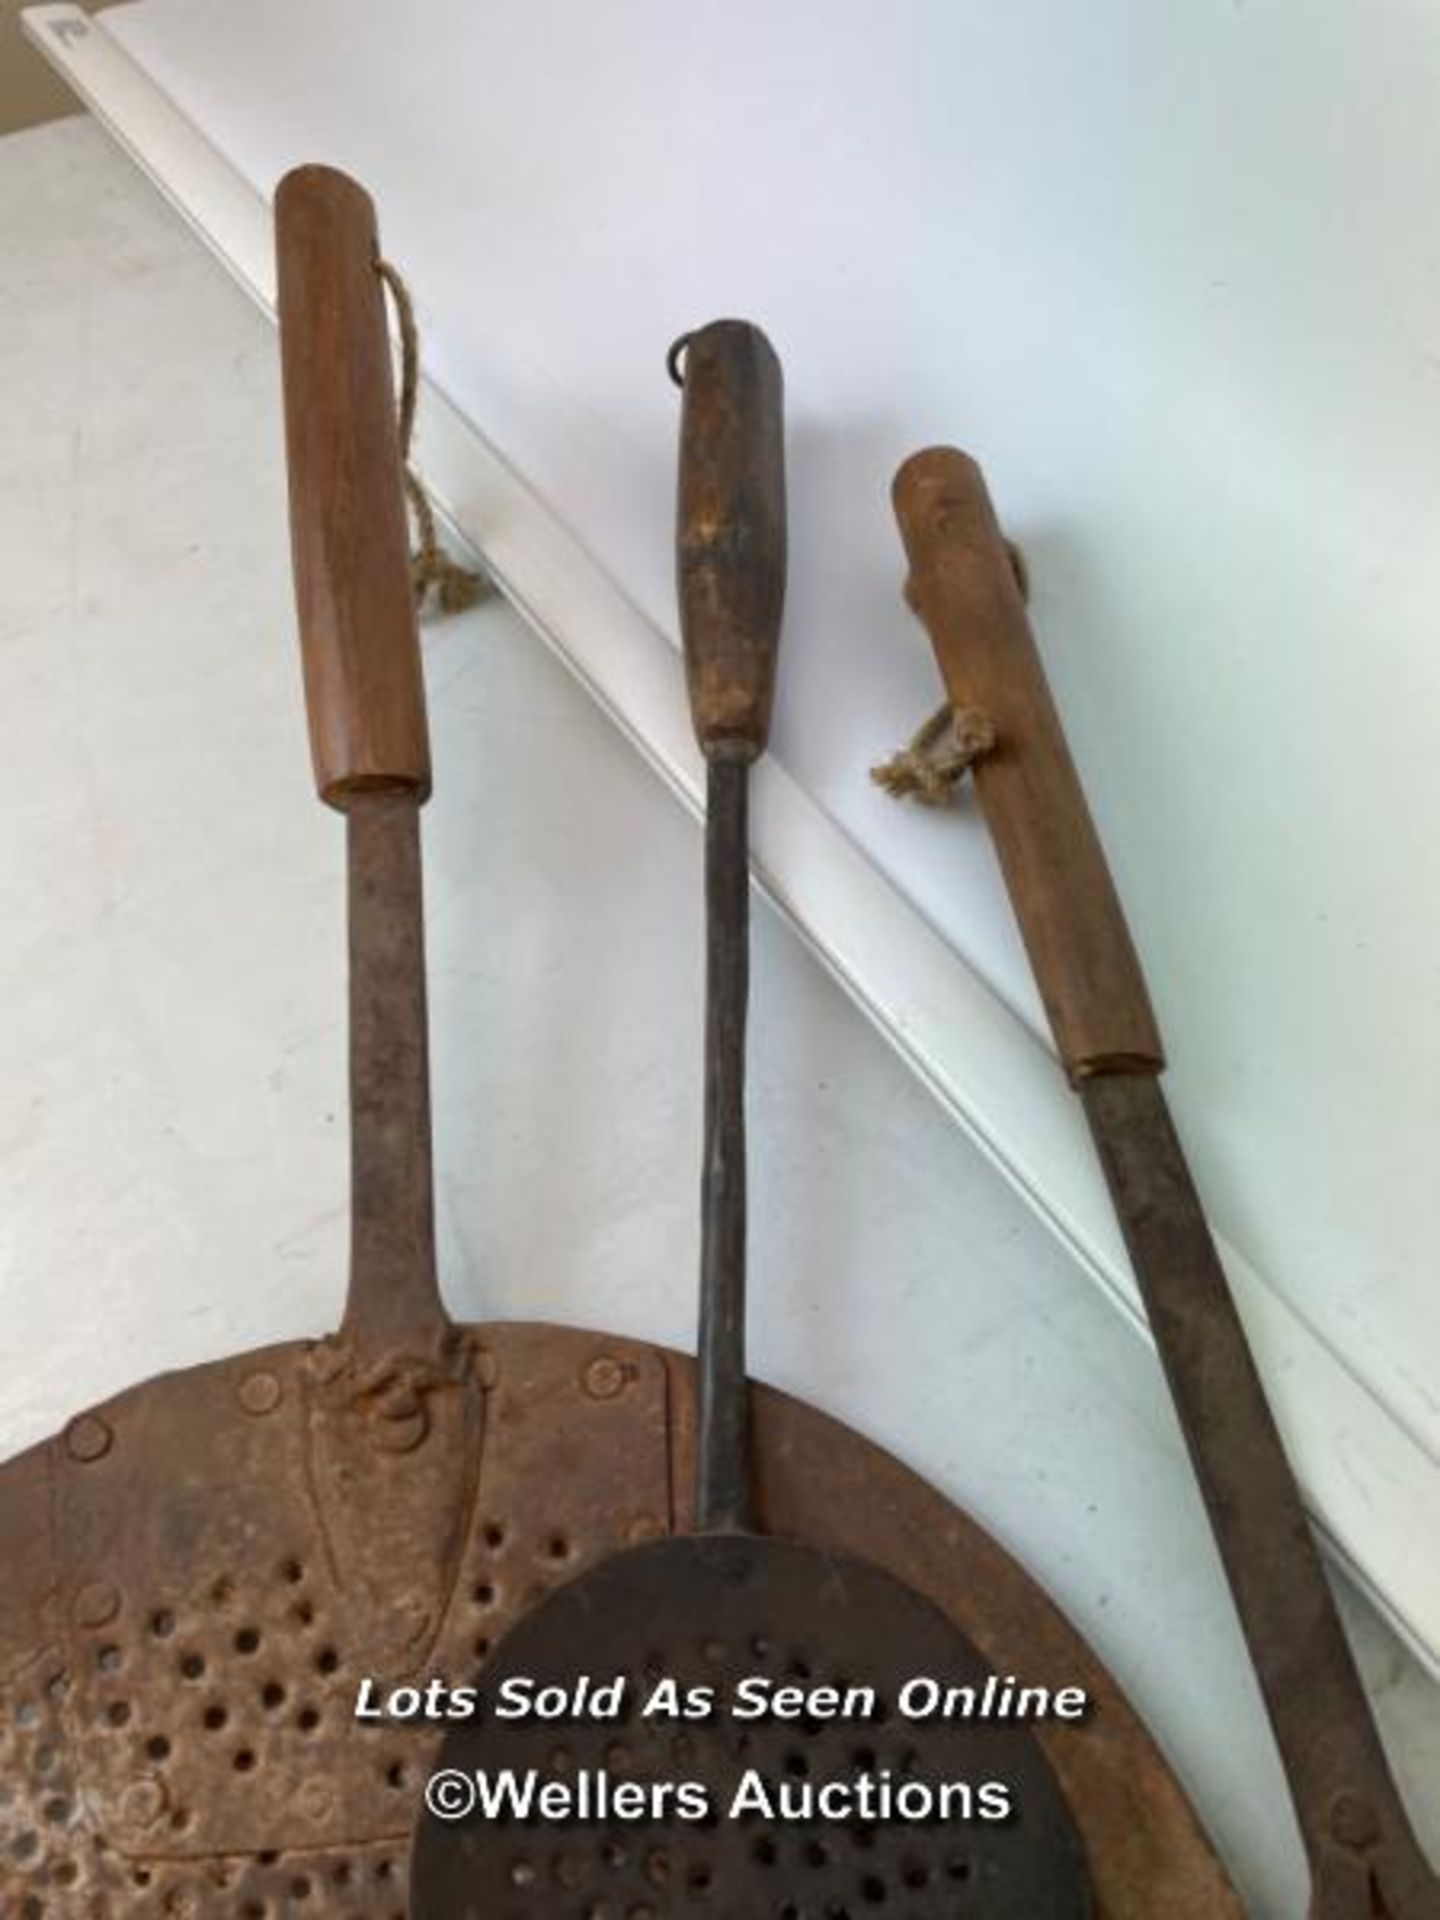 *INDIAN COOKING UTENSILS / CHAPPATI PANS WITH WOODE HANDLES / ITEM LOCATION: GUILDFORD, GU14SJ ( - Image 3 of 3